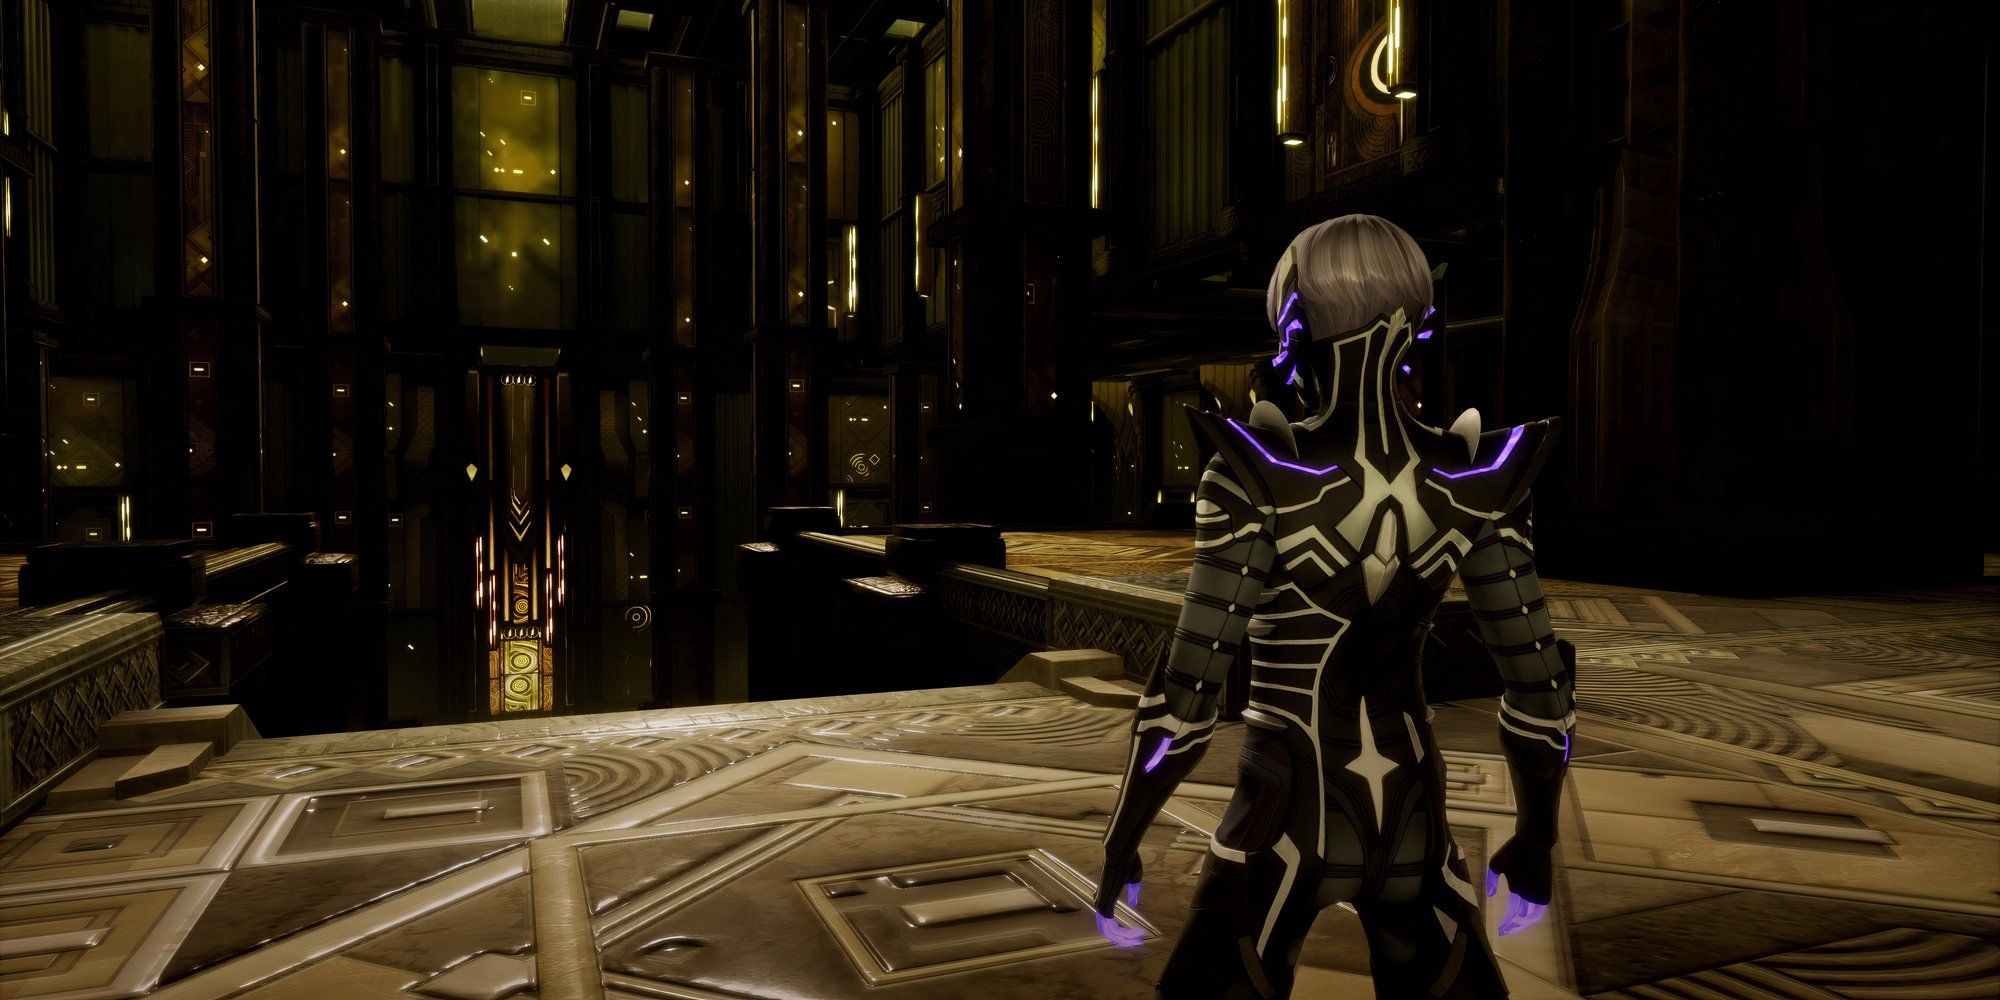 Shin Megami Tensei V: New Enhancements and Additions Bring Revenge to Gameplay